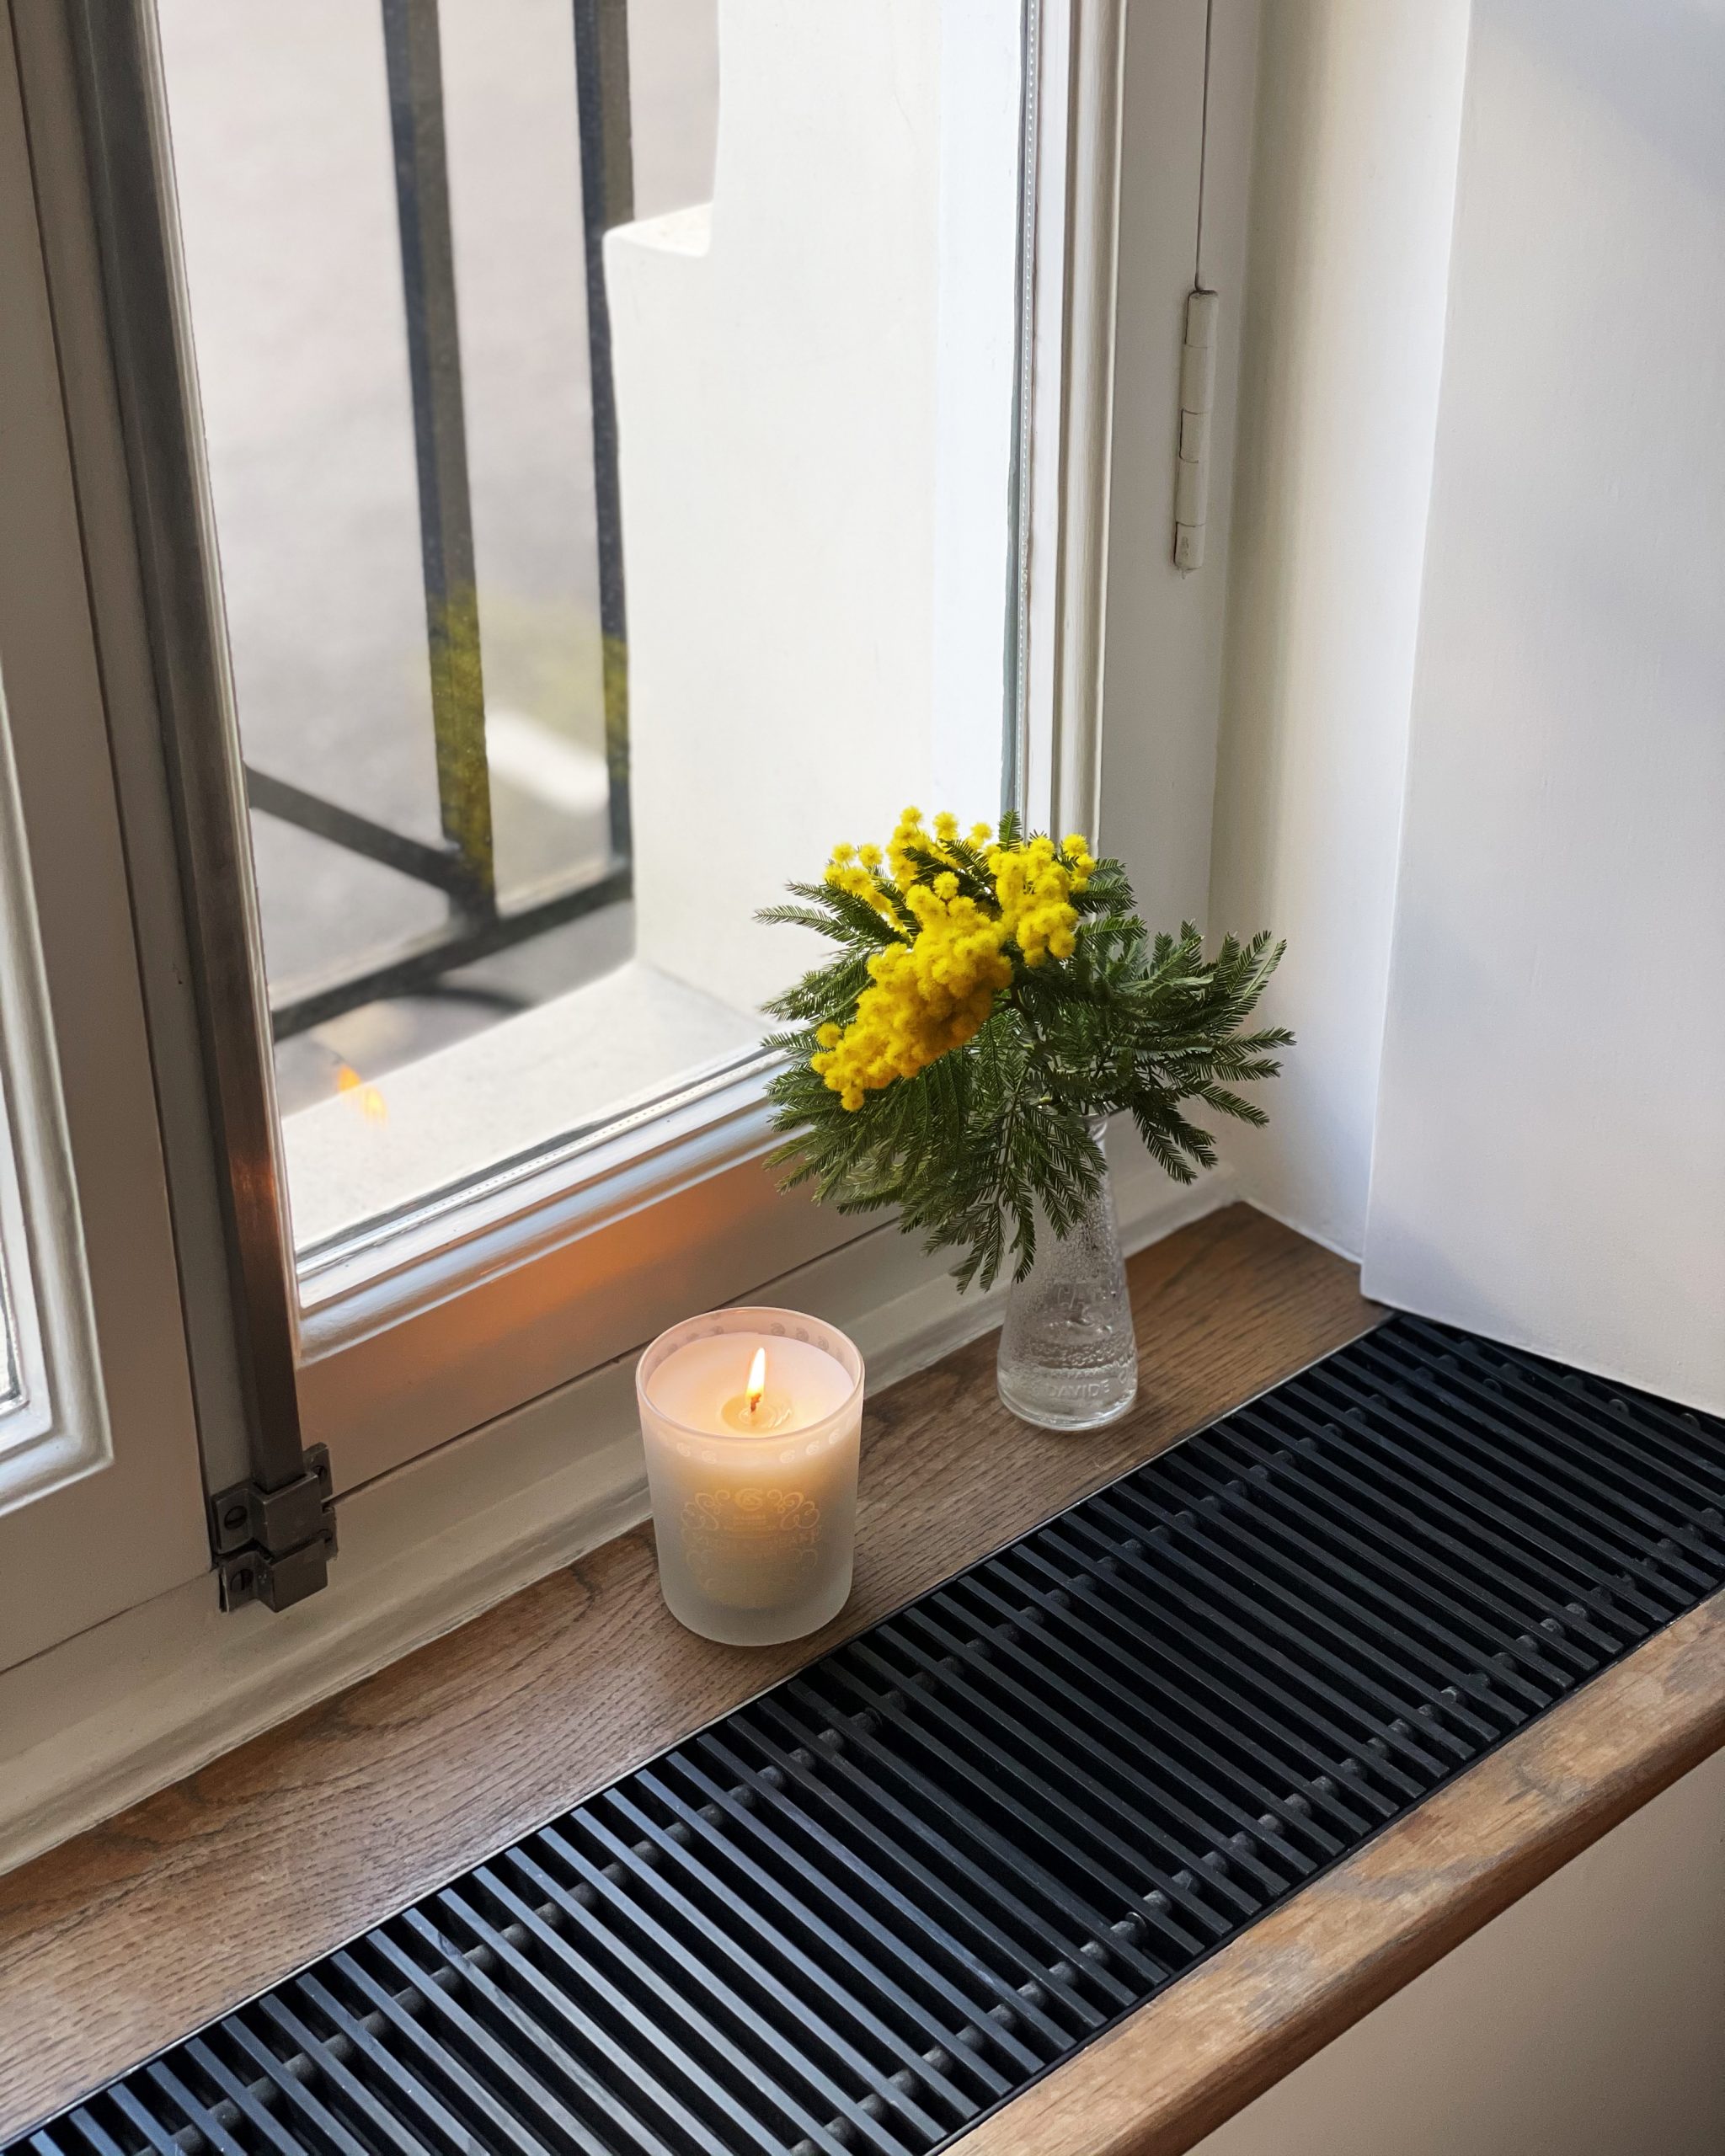 Scented candle with mimosa flowers window sill